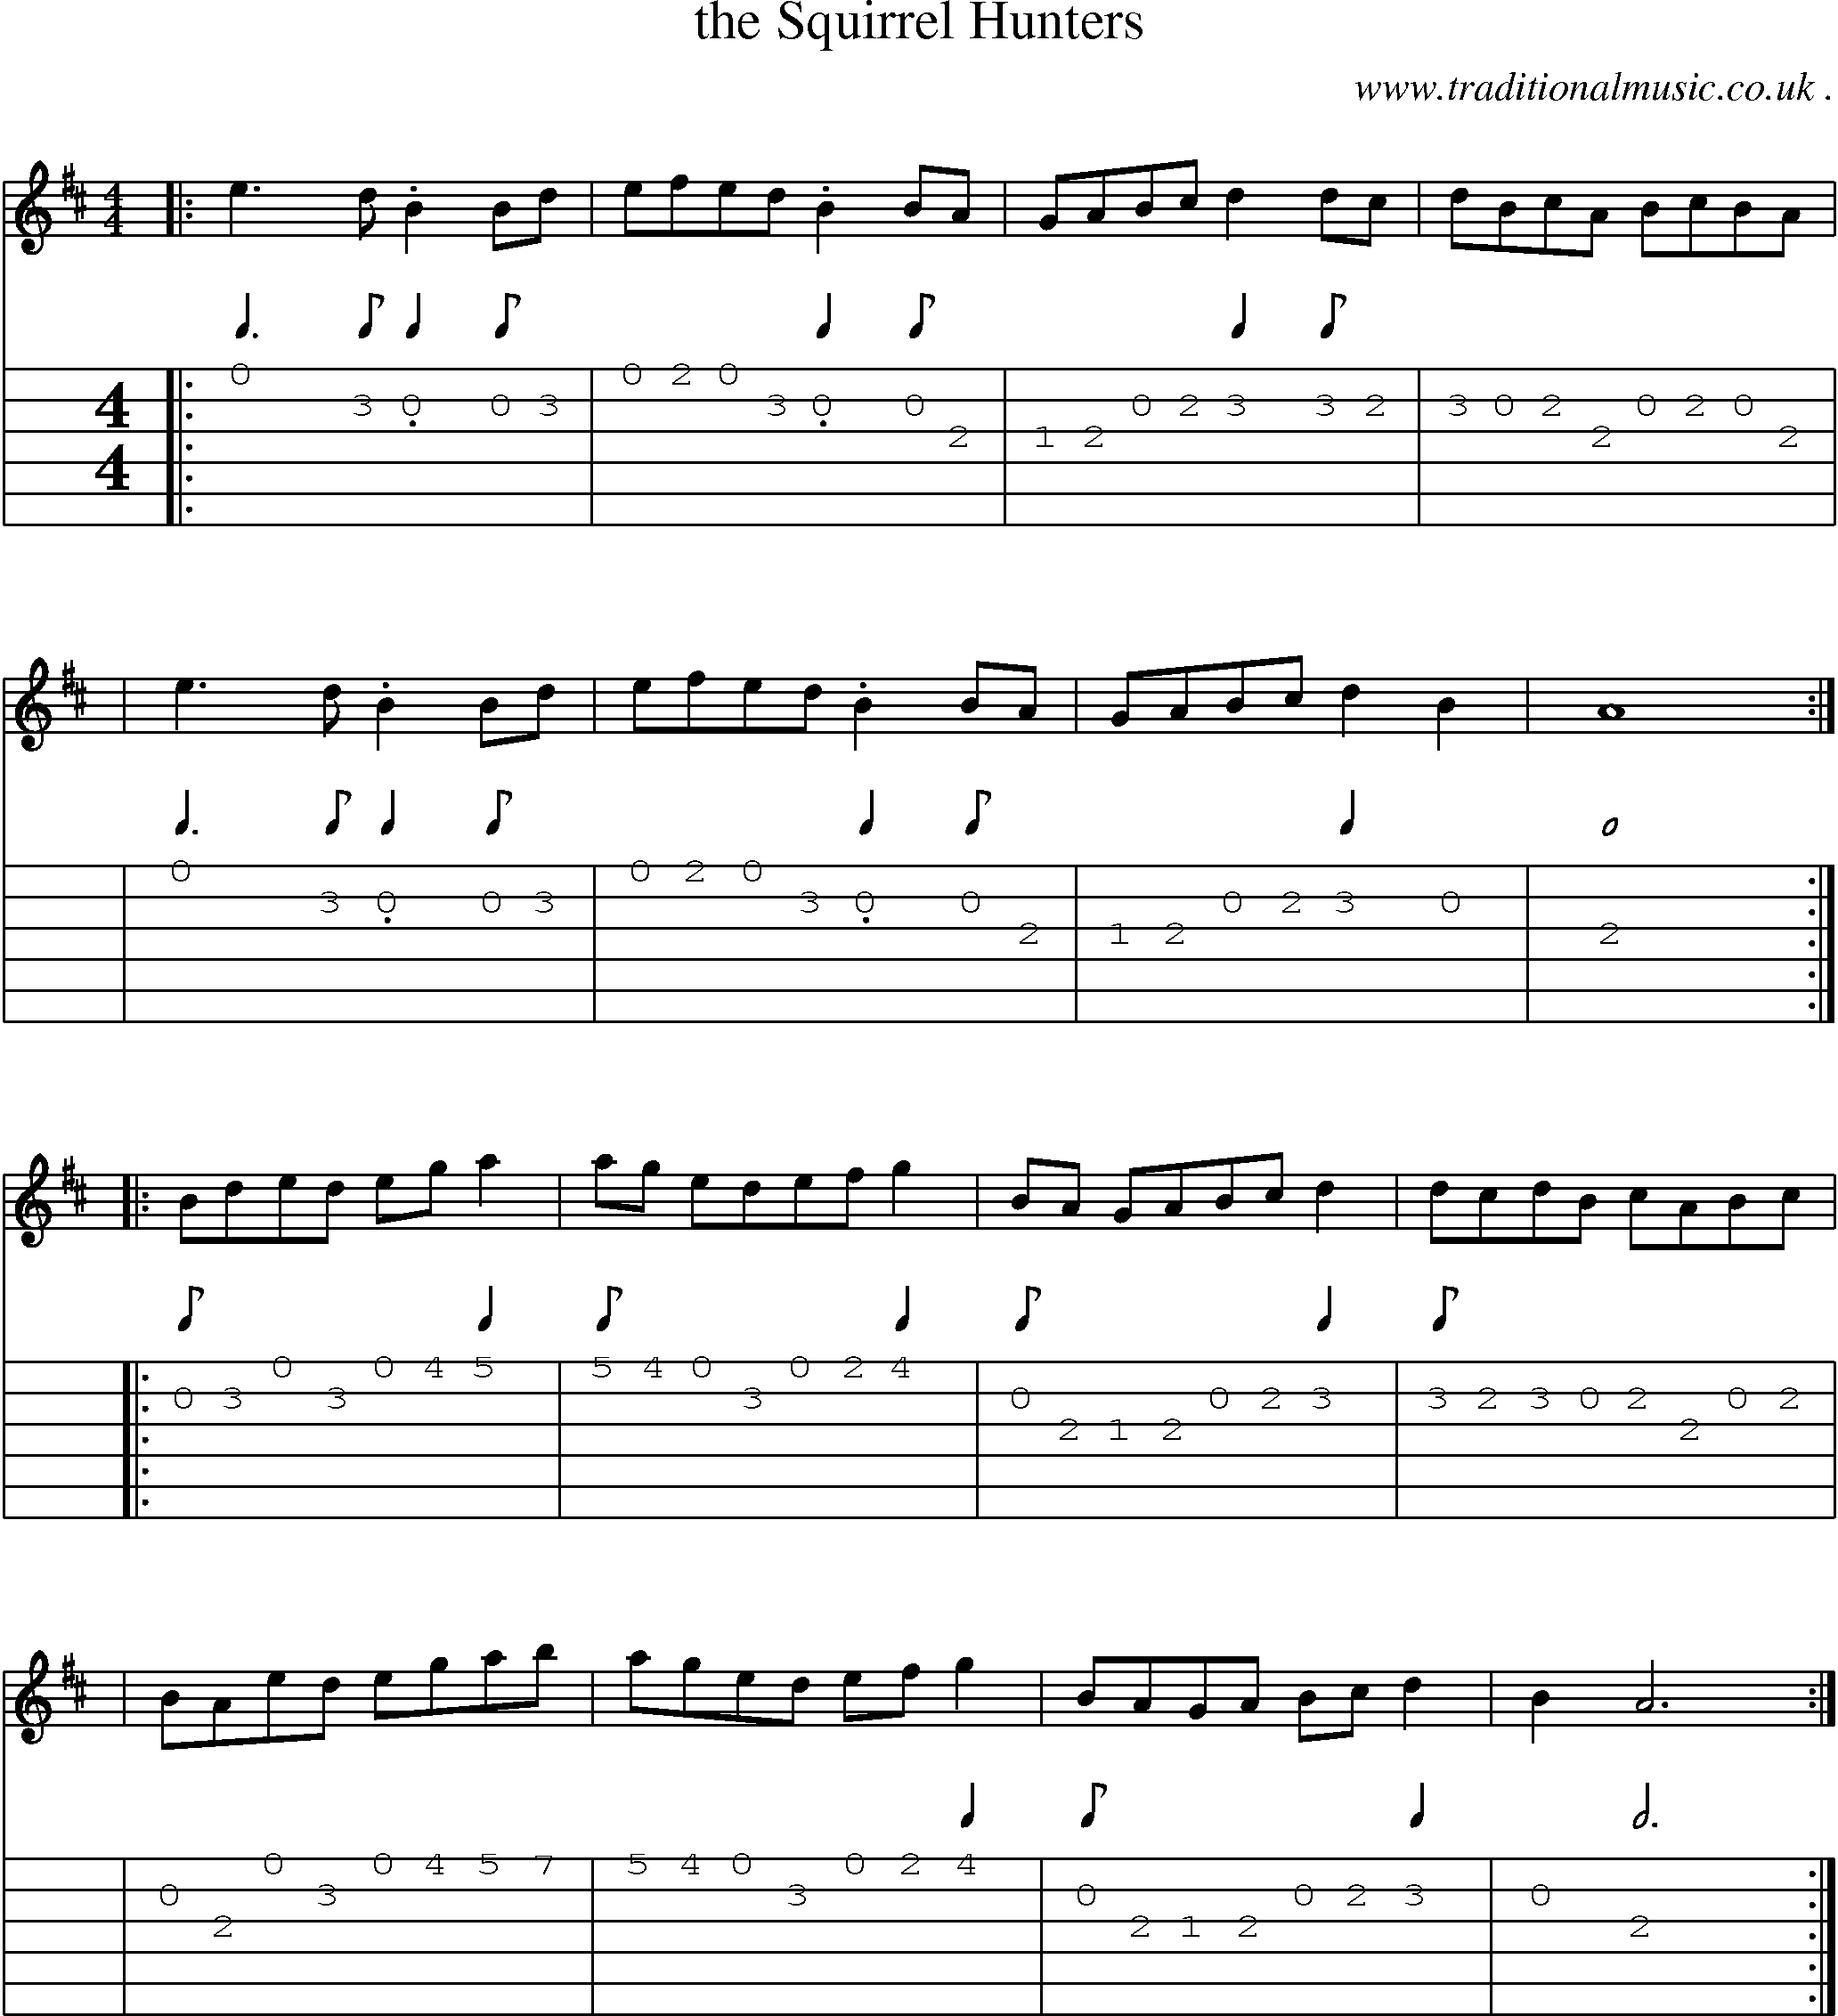 Music Score and Guitar Tabs for The Squirrel Hunters